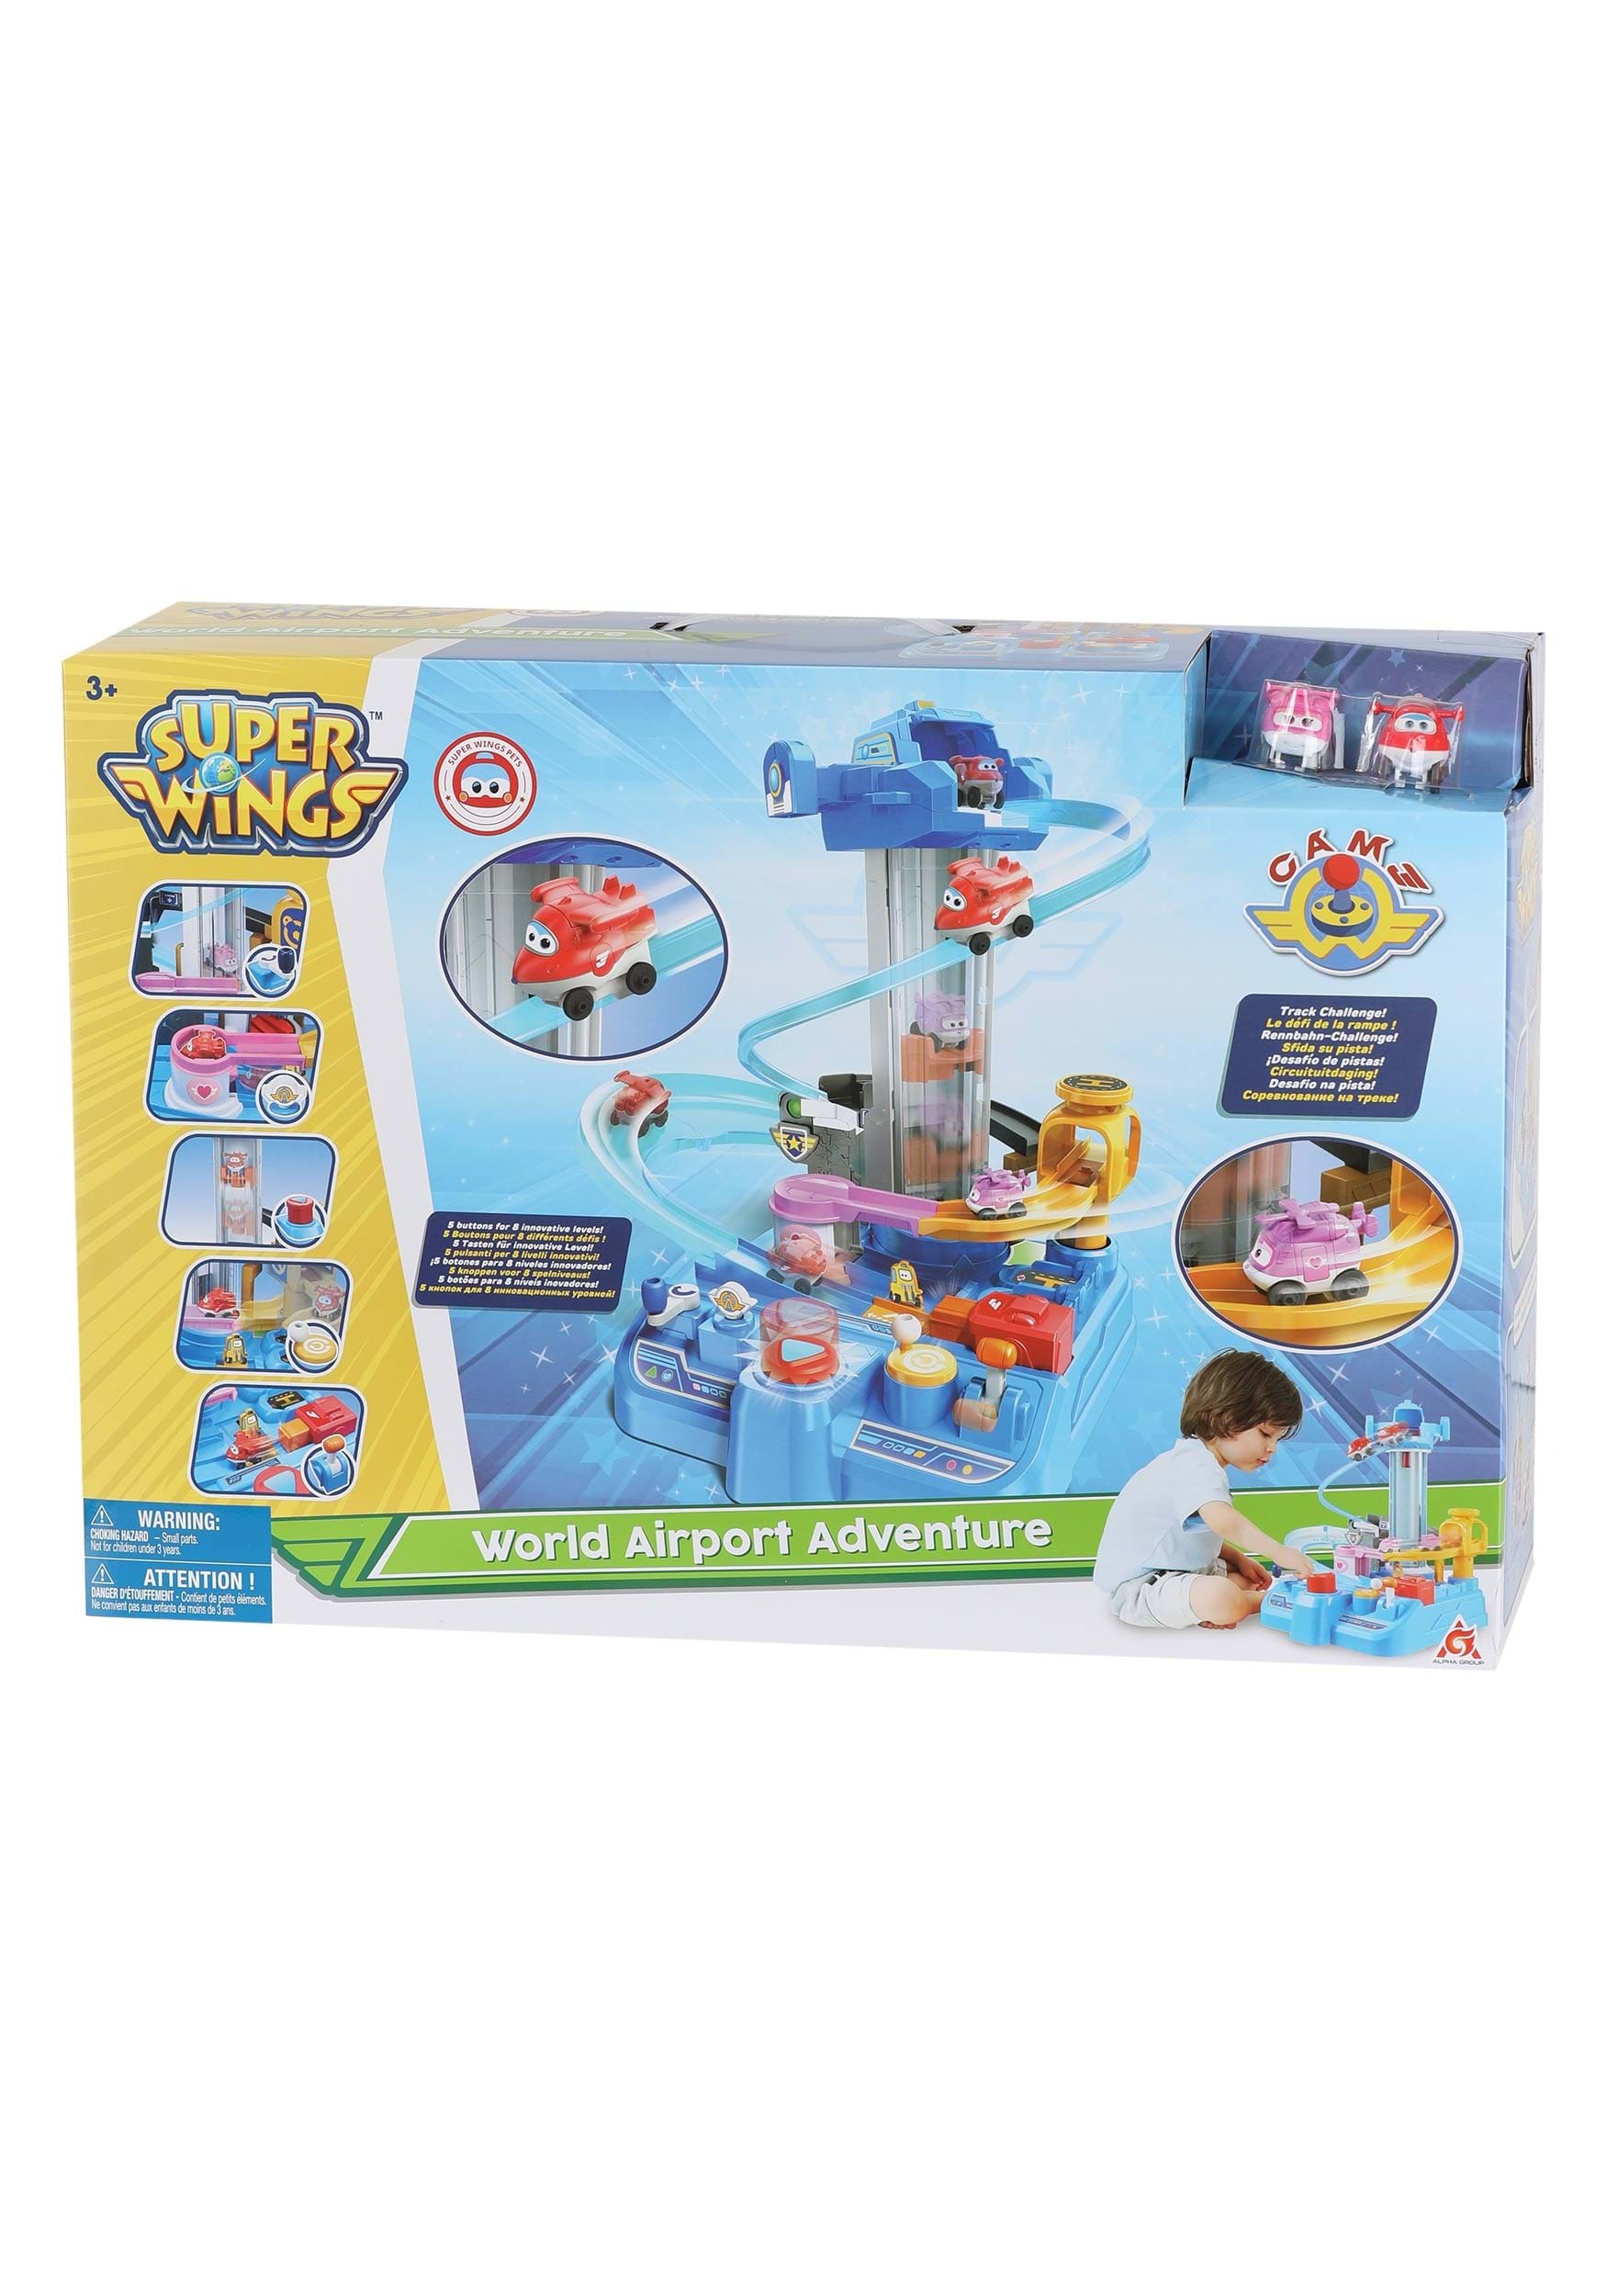 Super Wings Big World Airport Adventure Playset for Kids